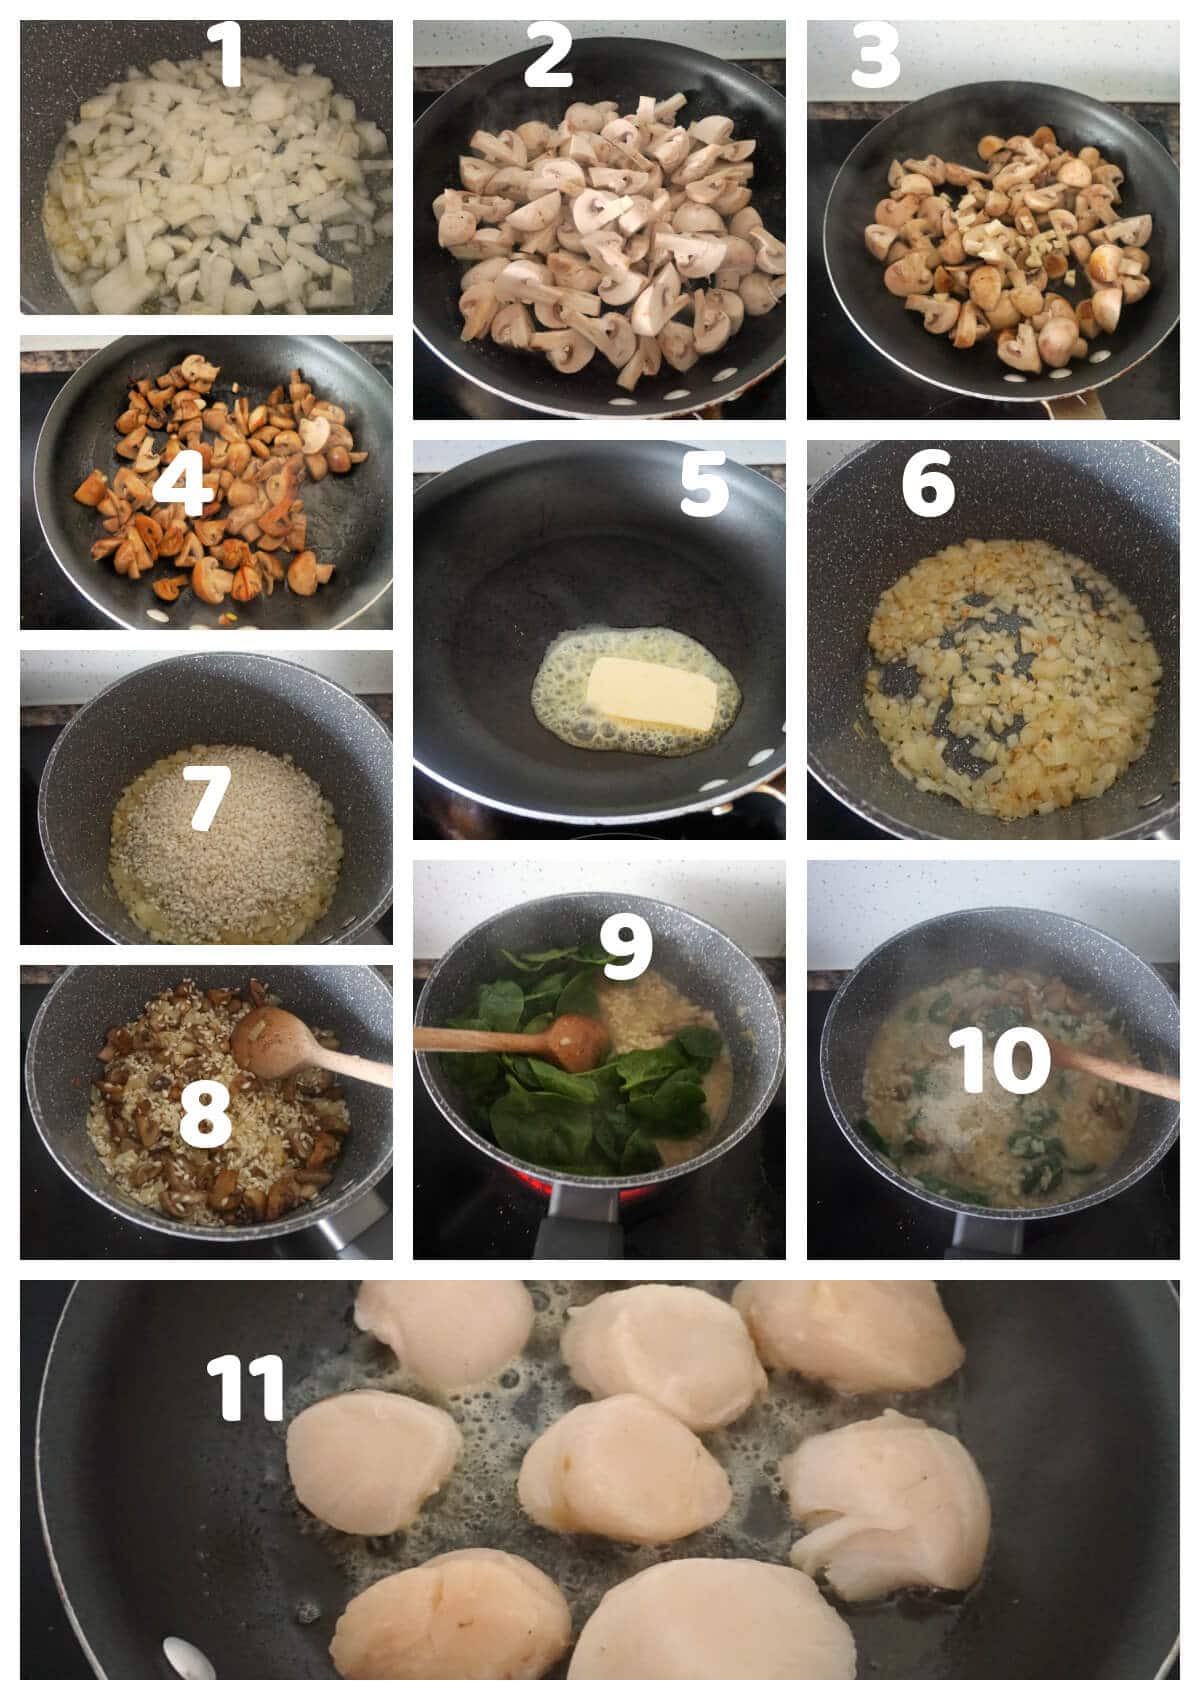 Collage of 11 pictures to show how to make mushroom risotto with seared scallops.